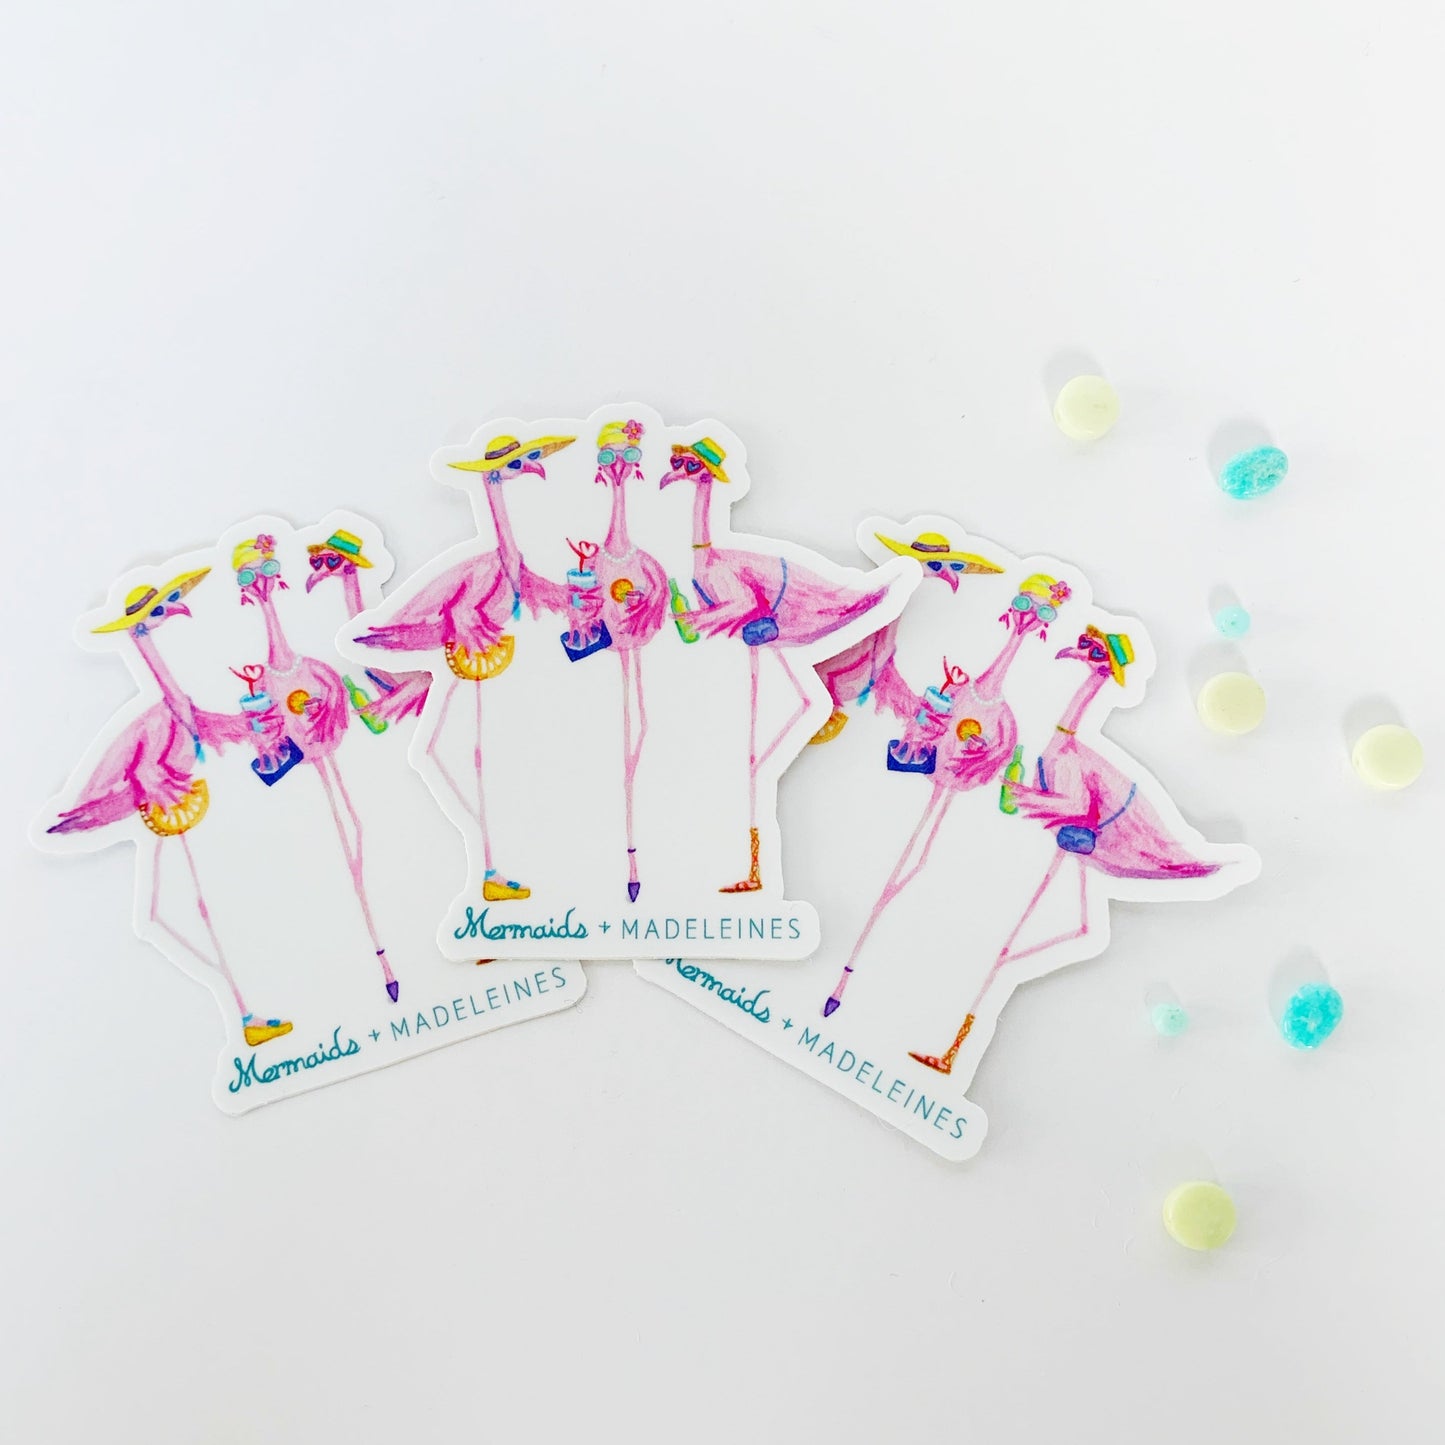 The flamingal sticker is created from original artwork made with acrylic paint and marker its 3 flamingo ladies dressed in summer hats and various footwear. This is a picture of the 3 pack, three stickers fanned out on a white background